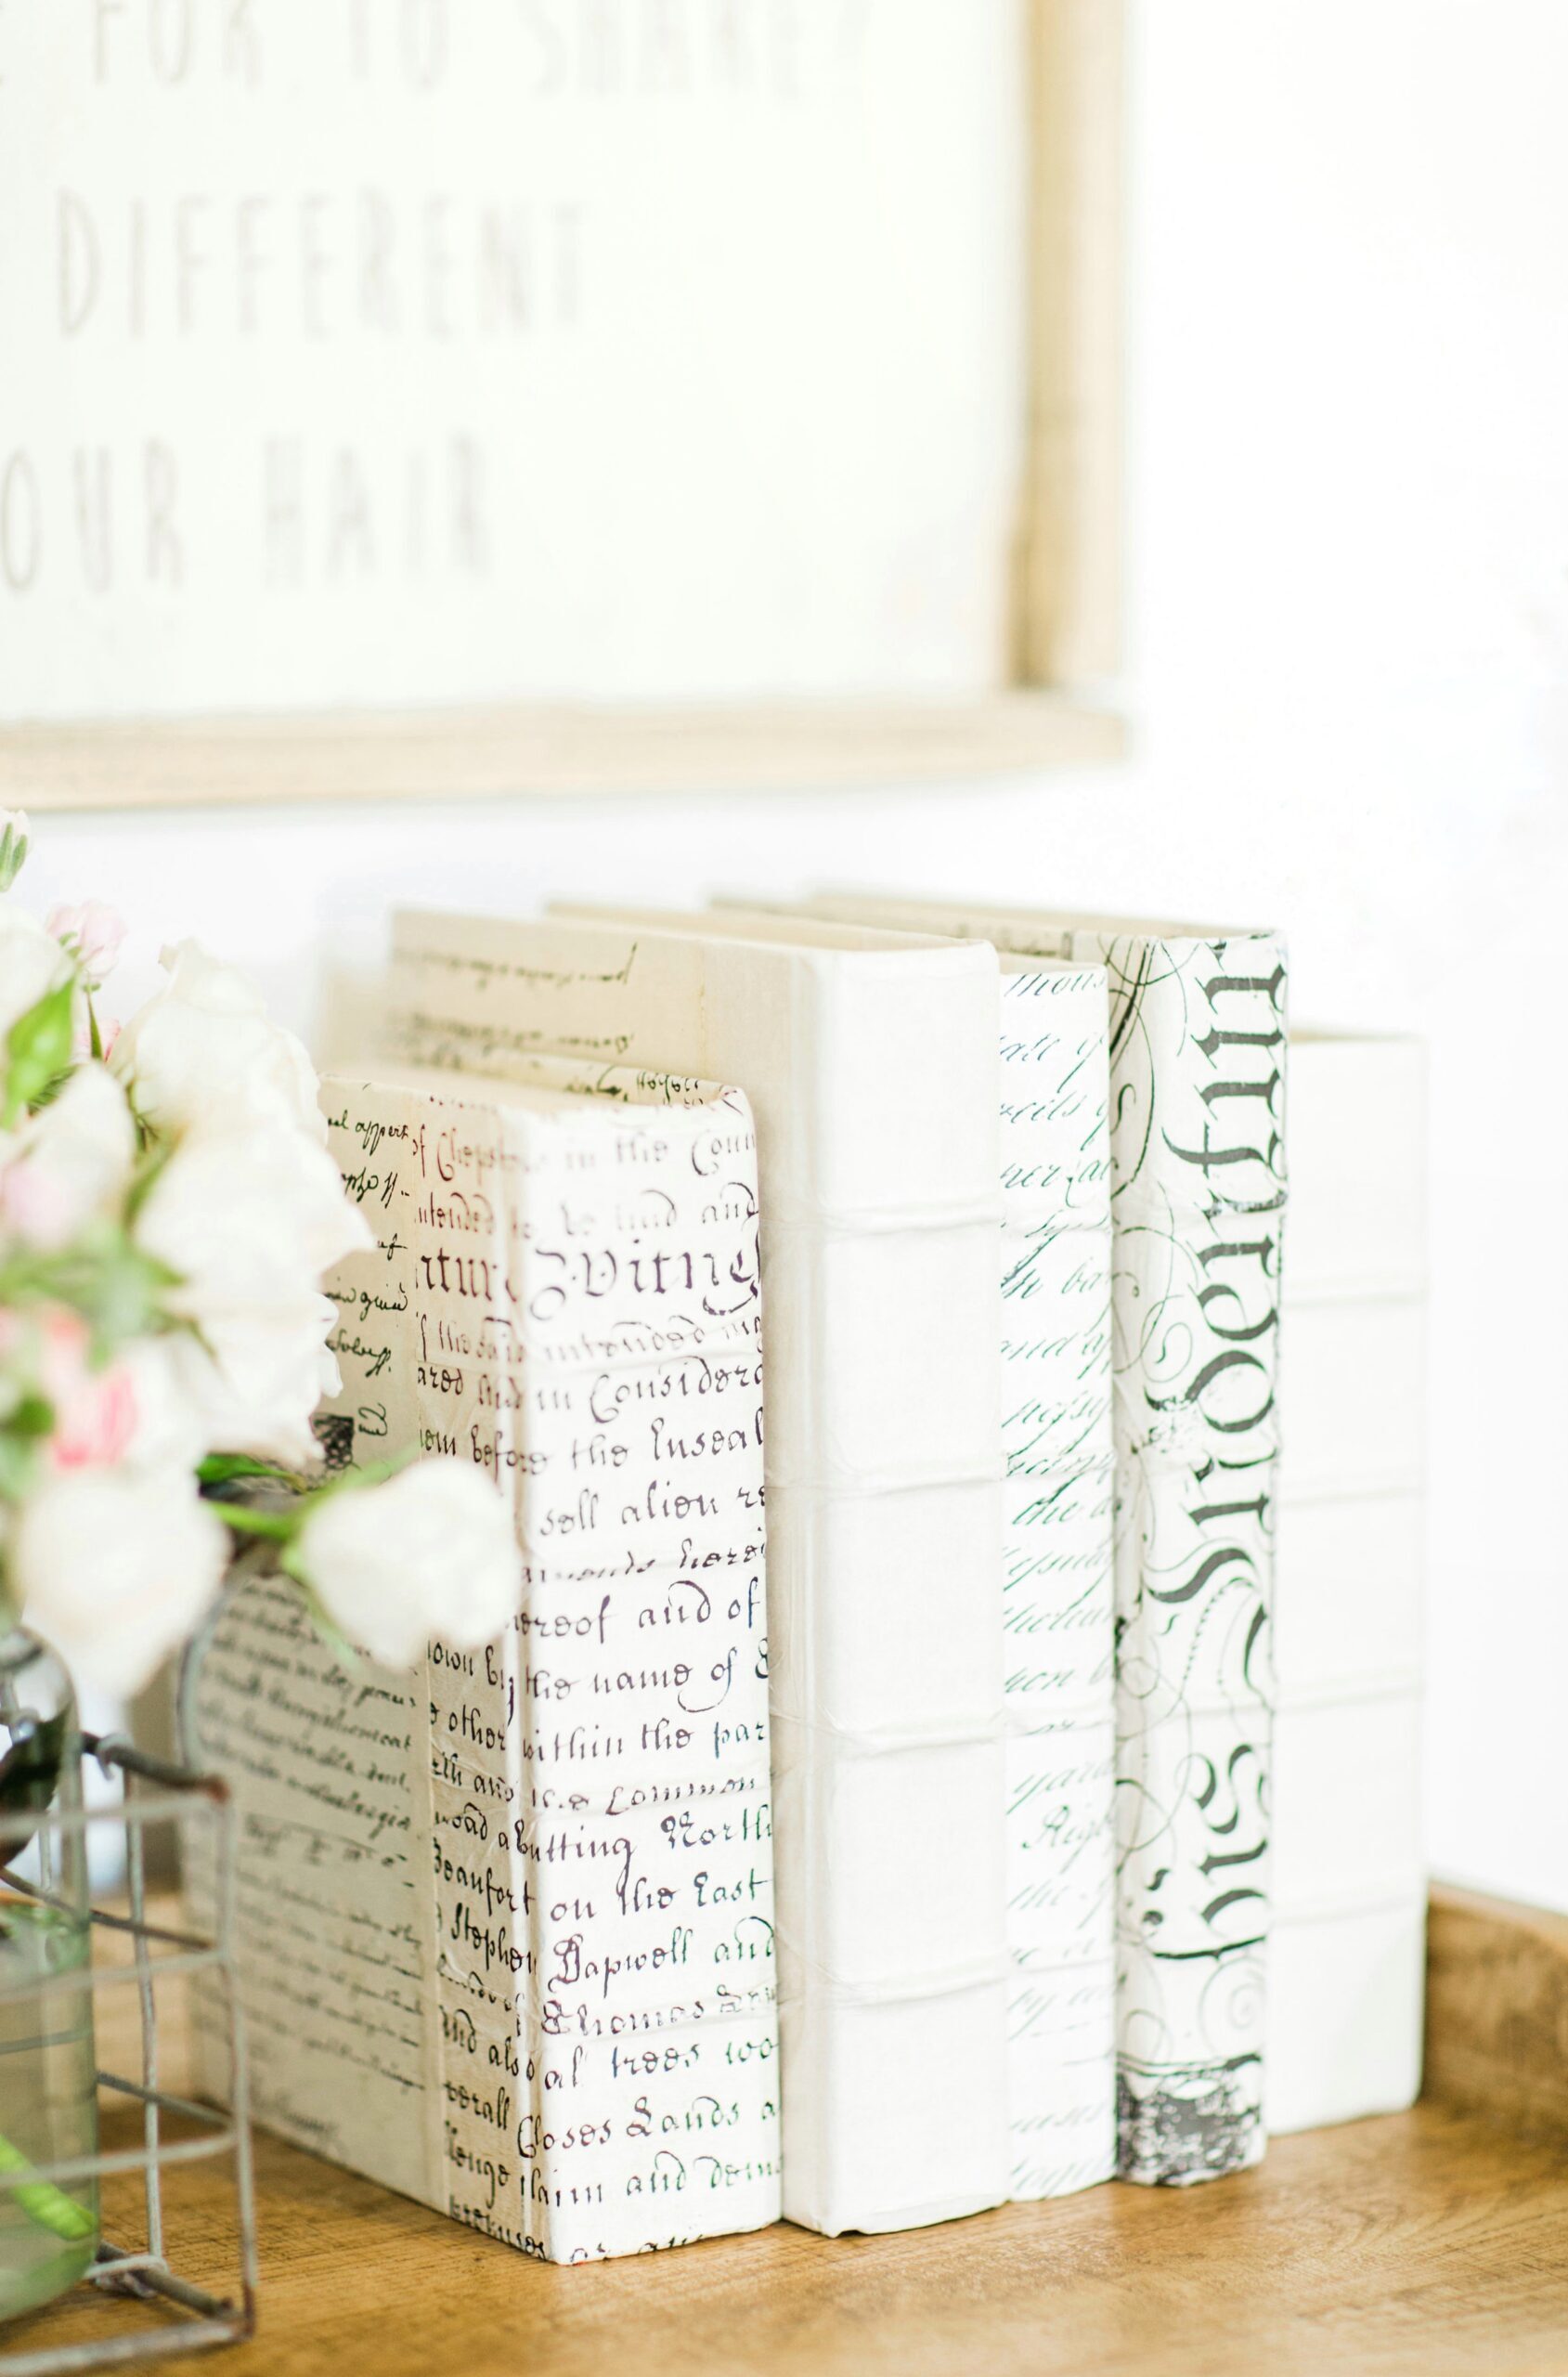 Little Love Notes + Covered Book Spines + Details on the First Week in Our New Home - GLITTERINC.COM